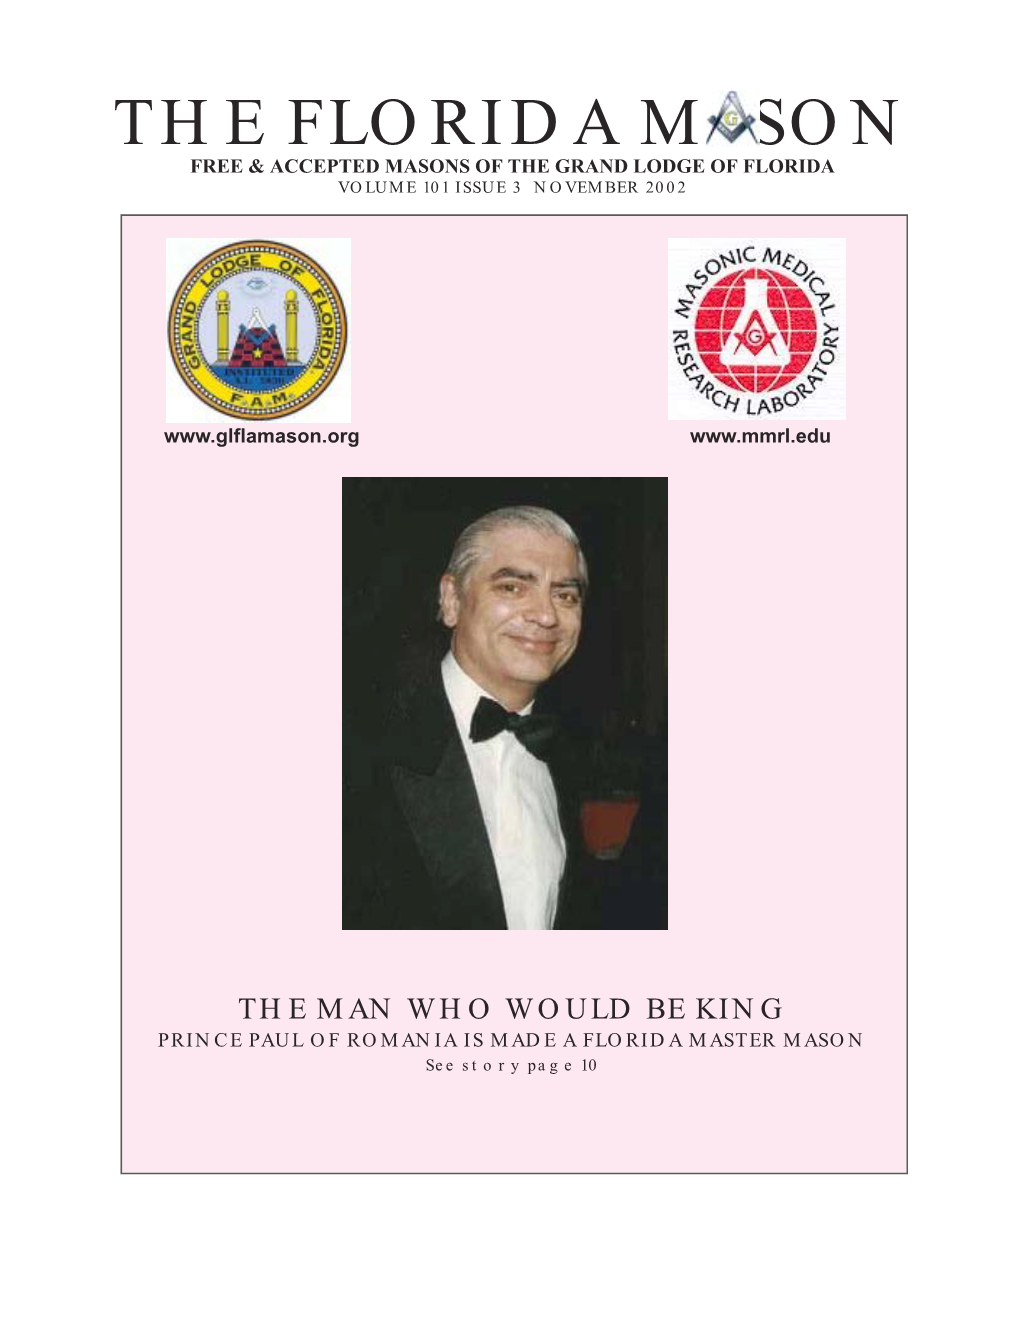 The Florida M Son Free & Accepted Masons of the Grand Lodge of Florida Volume 101 Issue 3 November 2002